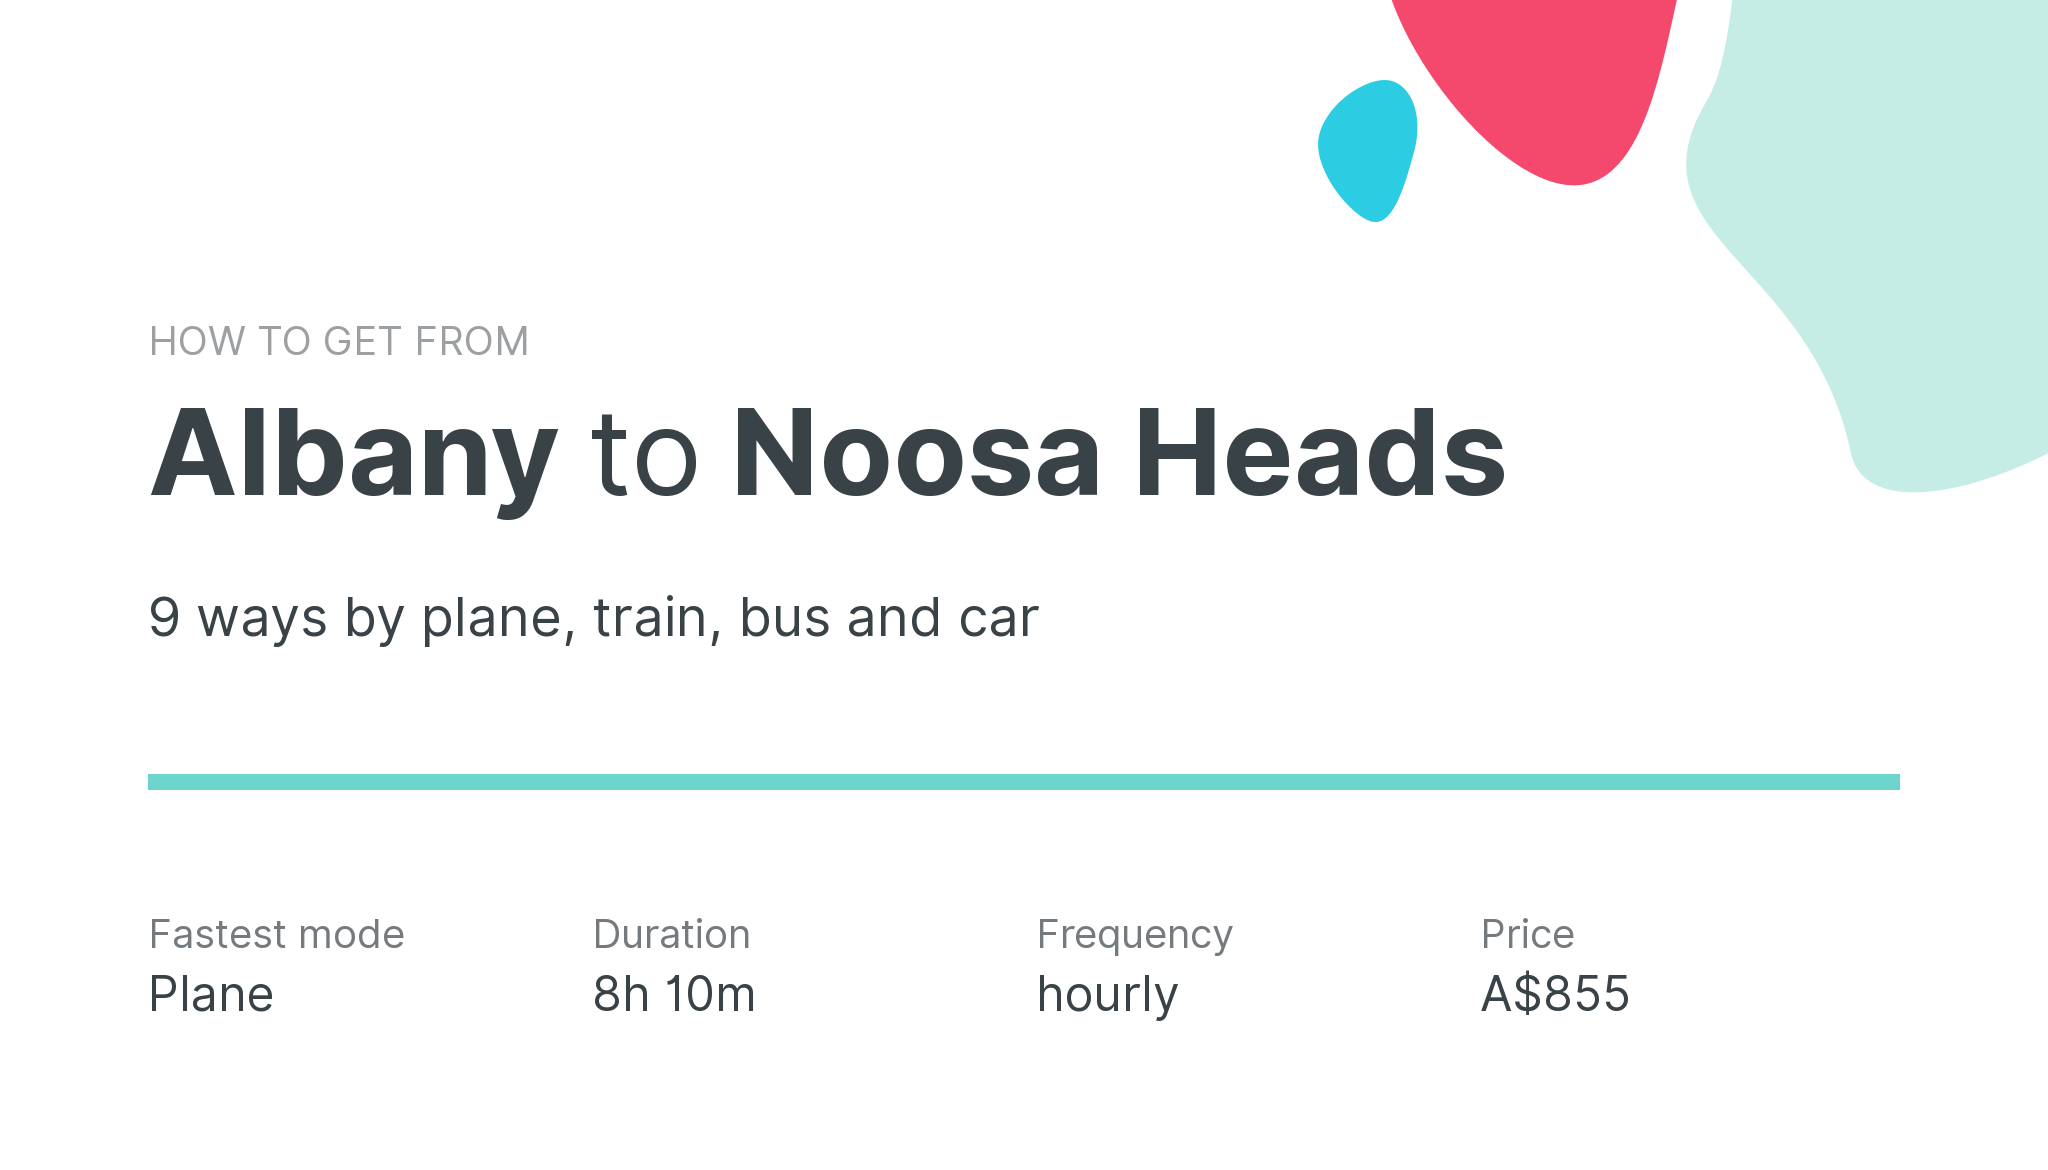 How do I get from Albany to Noosa Heads